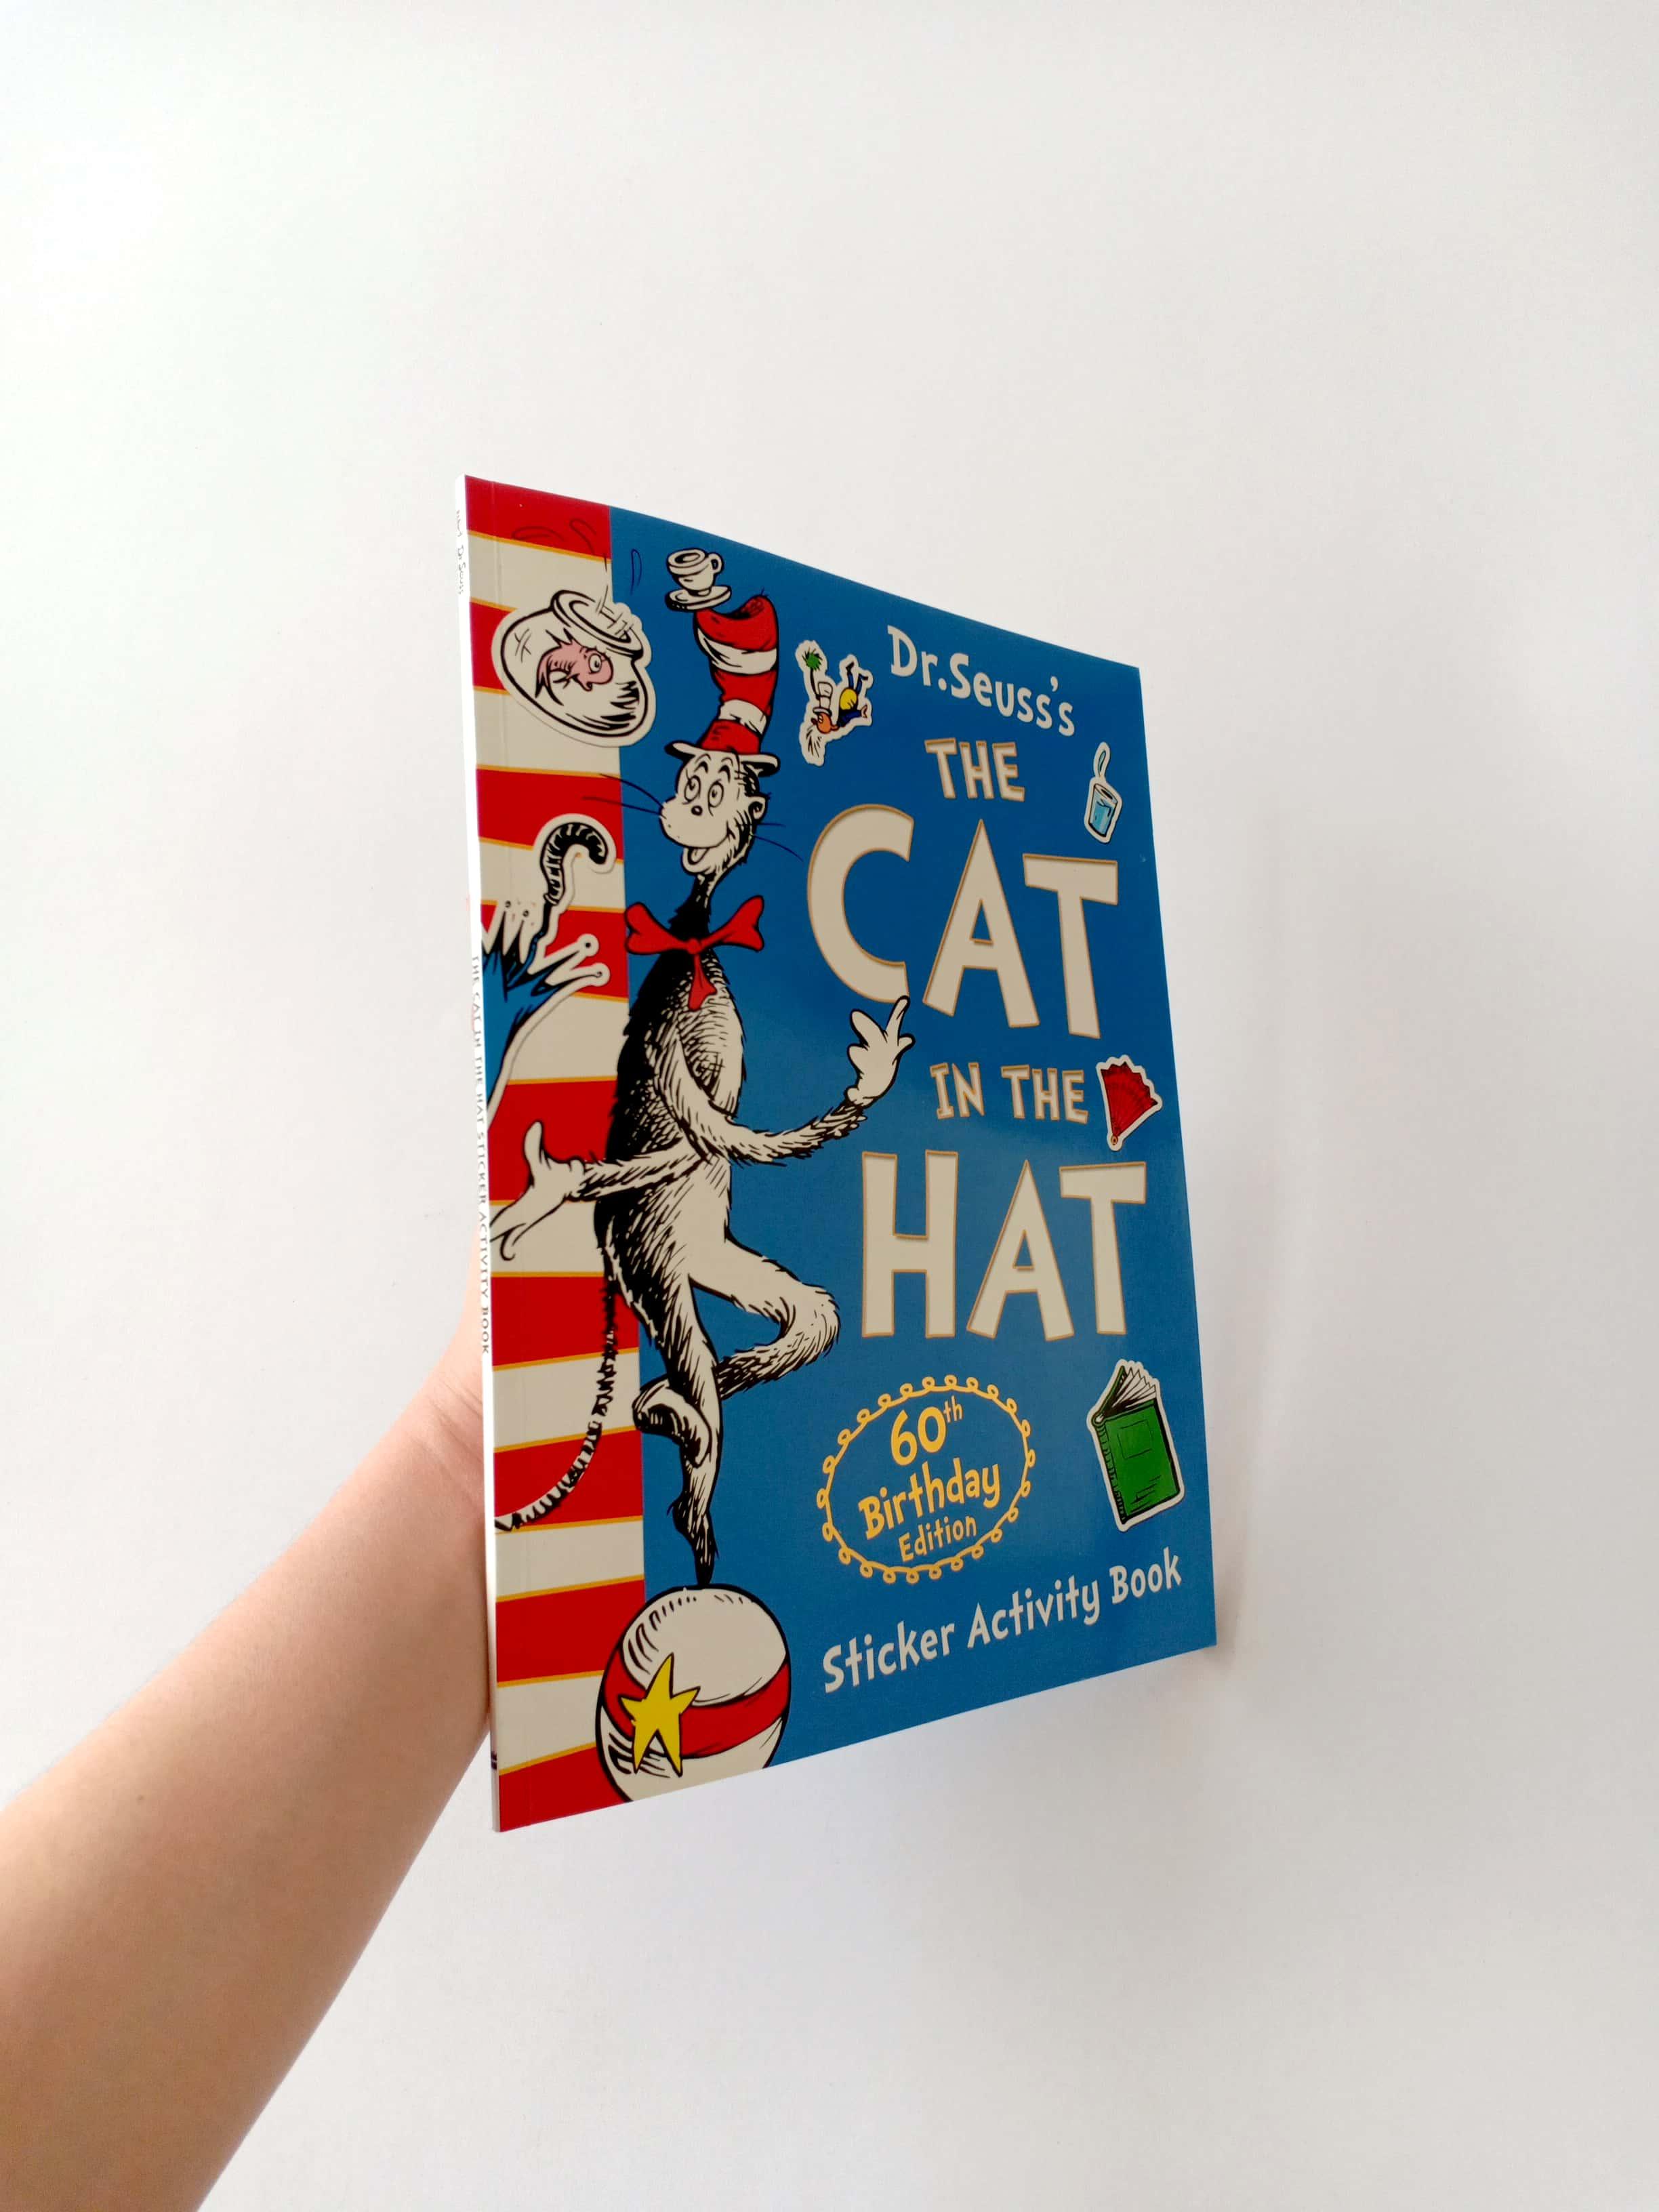 The Cat in the Hat Sticker Activity Book. 60th Birthday Edition